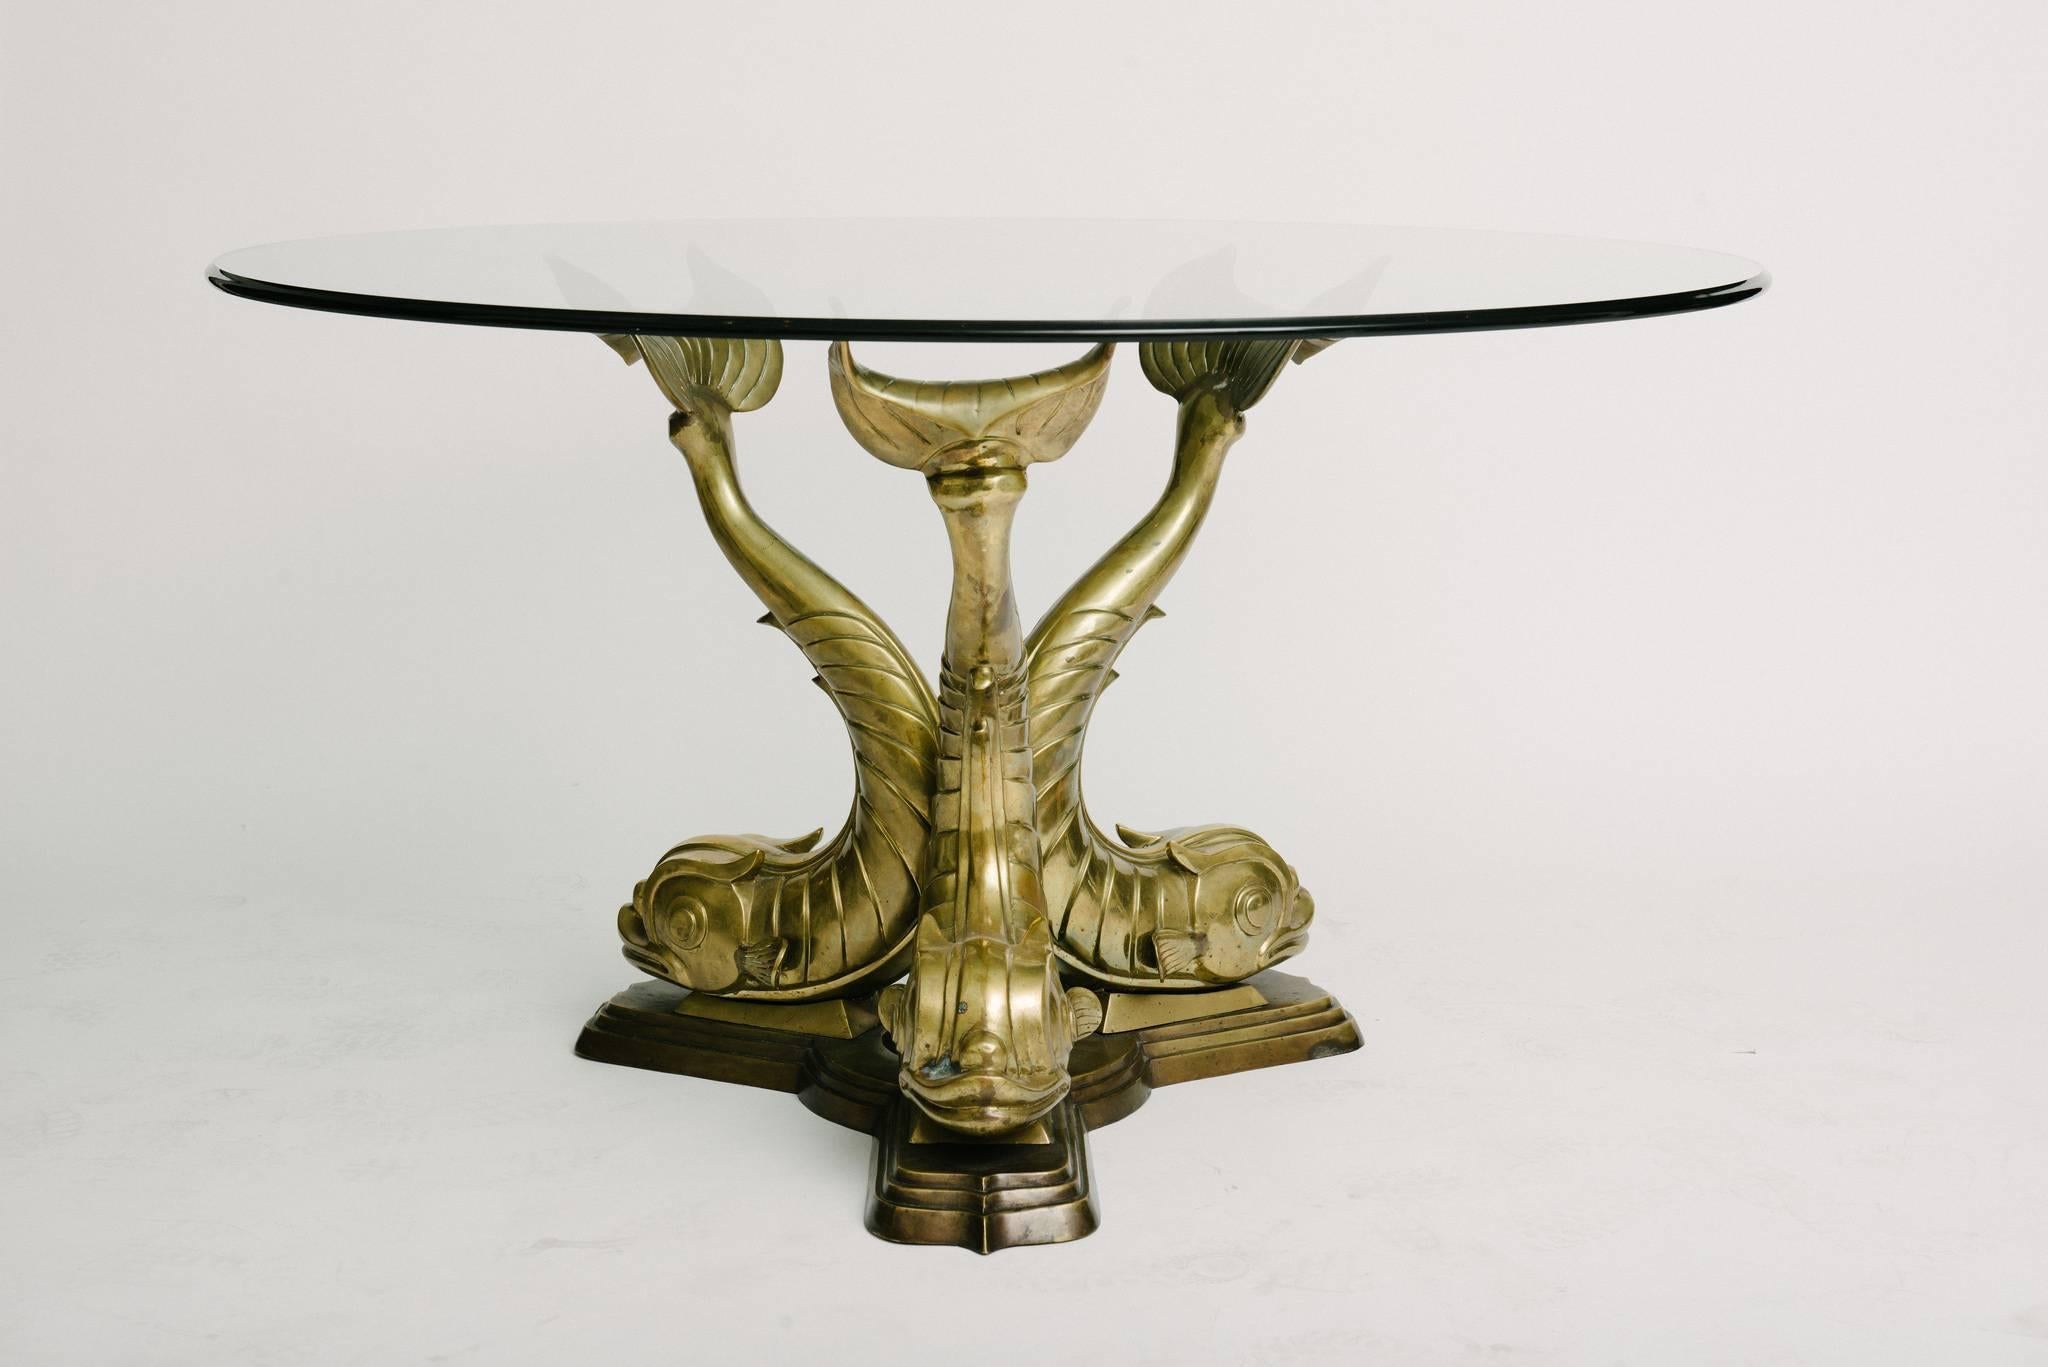 Vintage brass dolphins dining or center table base shown with 54